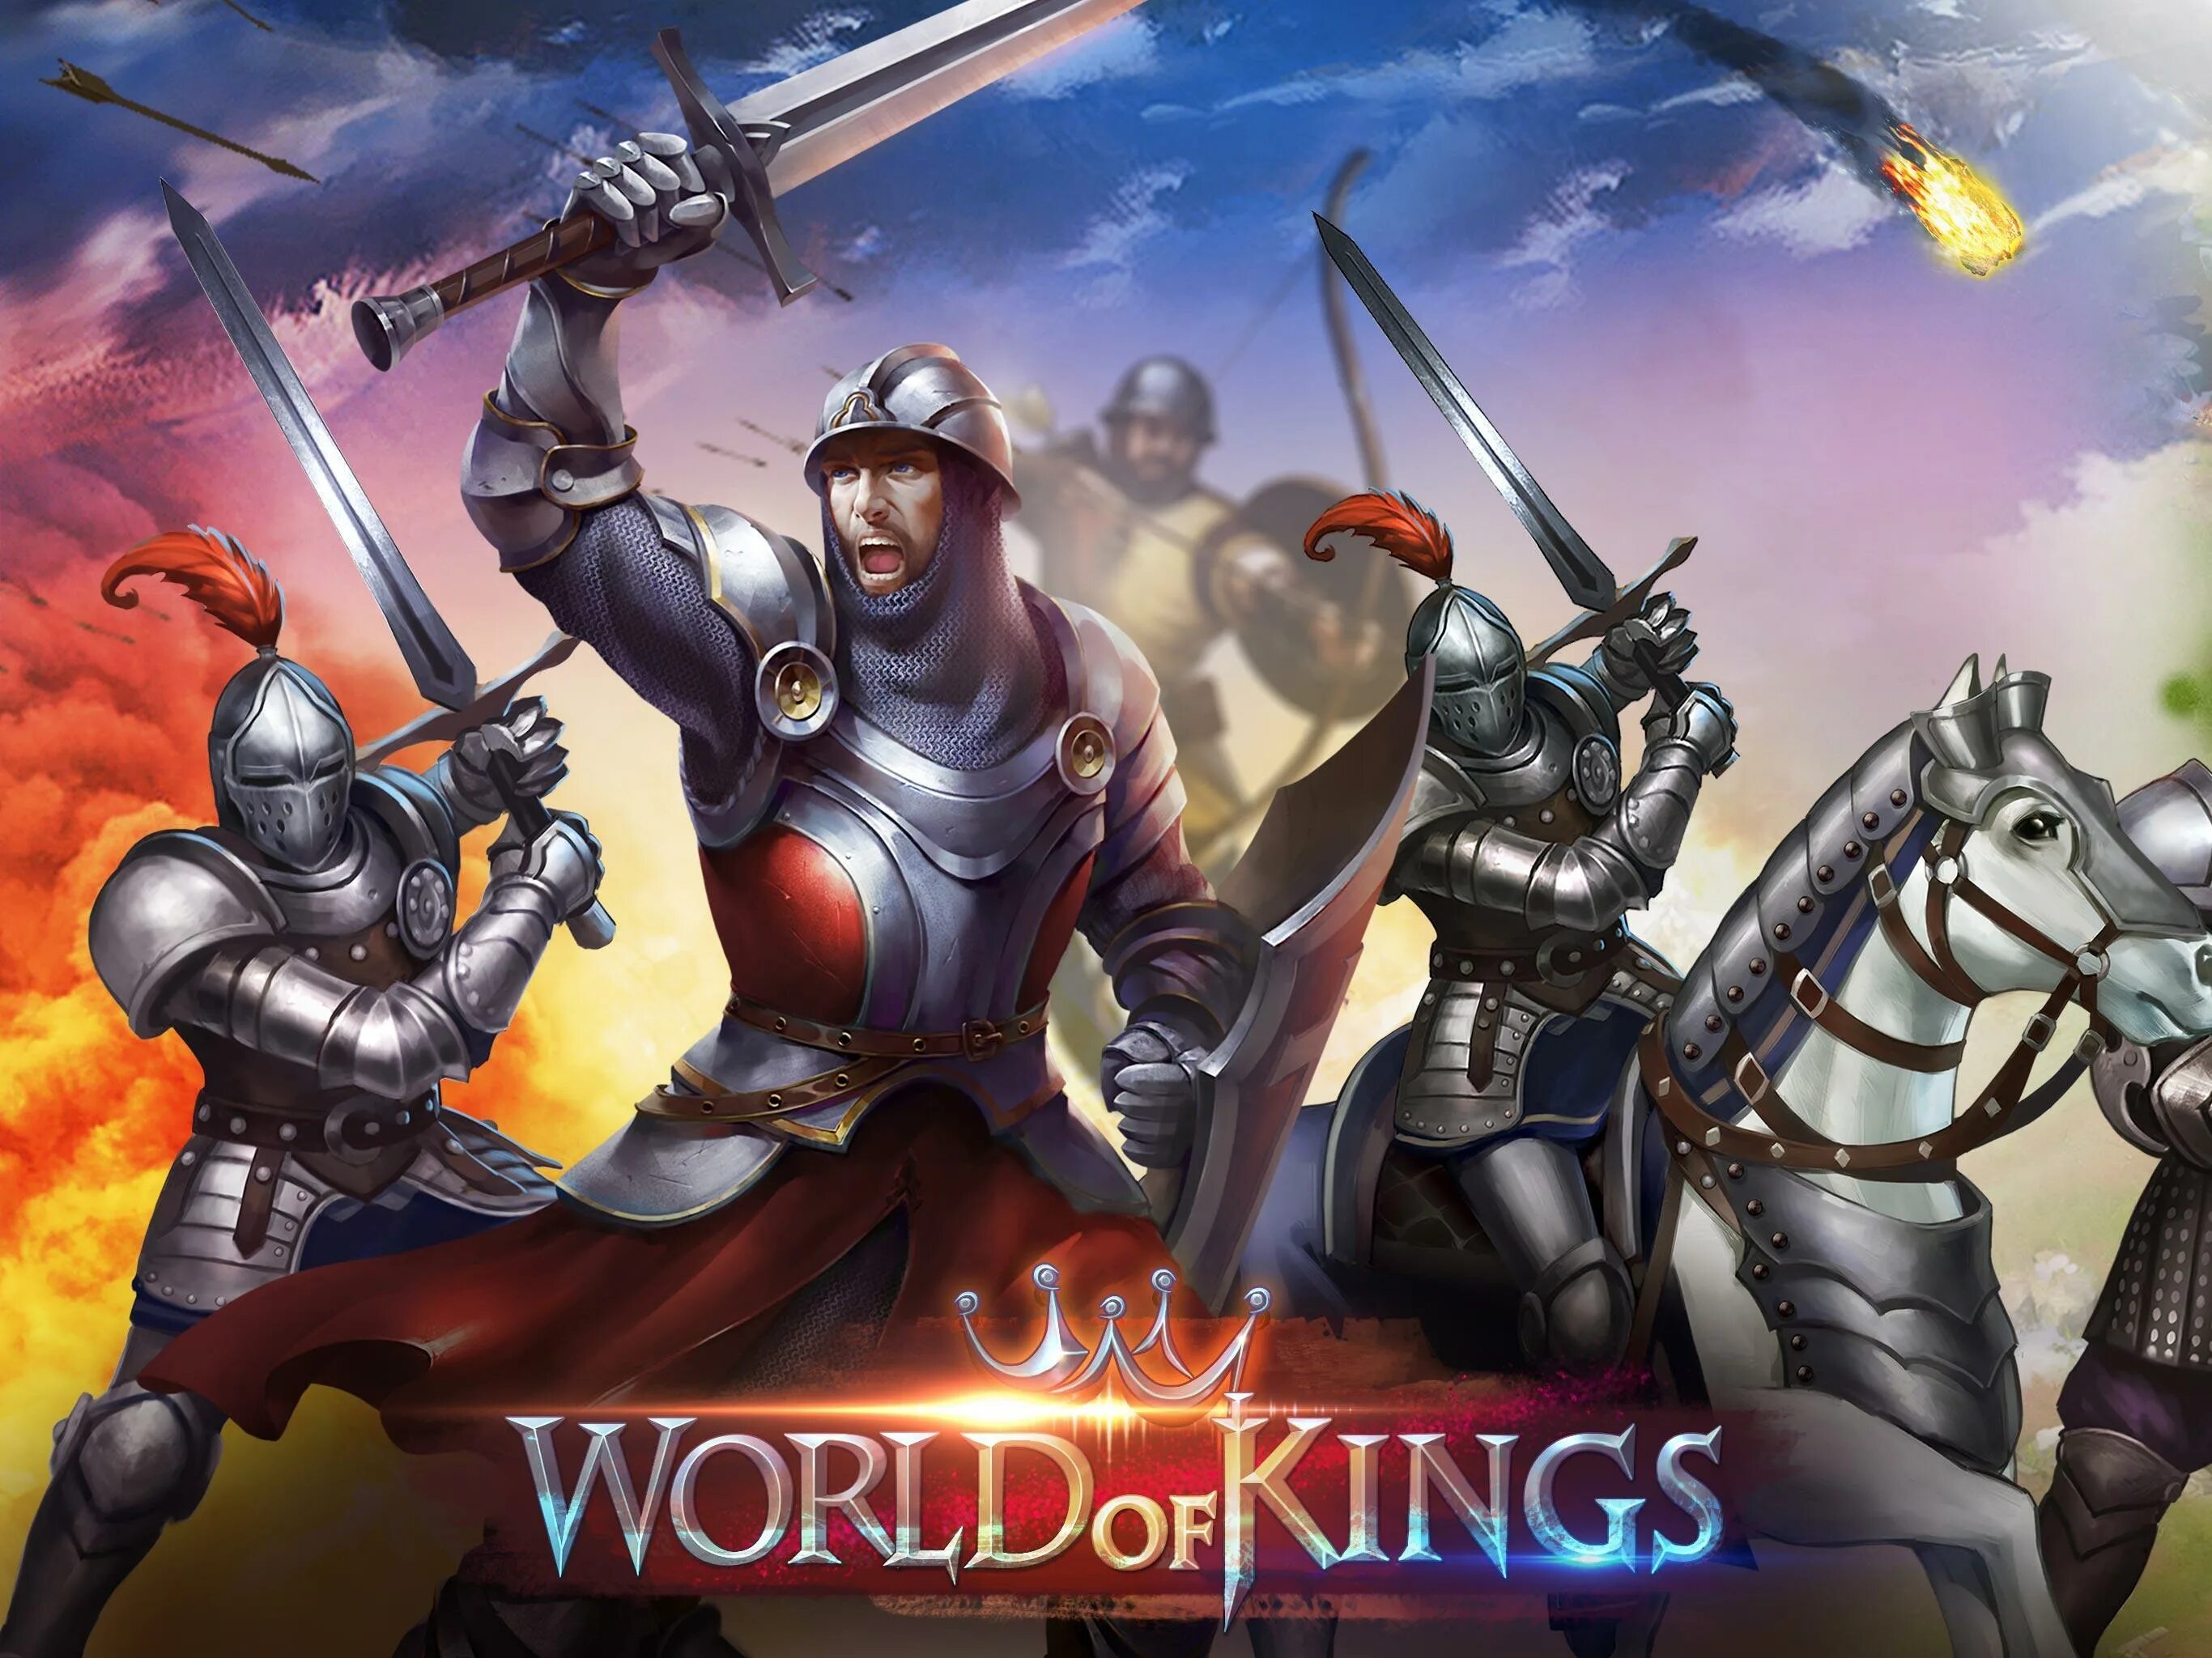 King game download. Игра World of Kings. Игра King of Kings. Игра на андроид King. King of Kings игра на телефон.